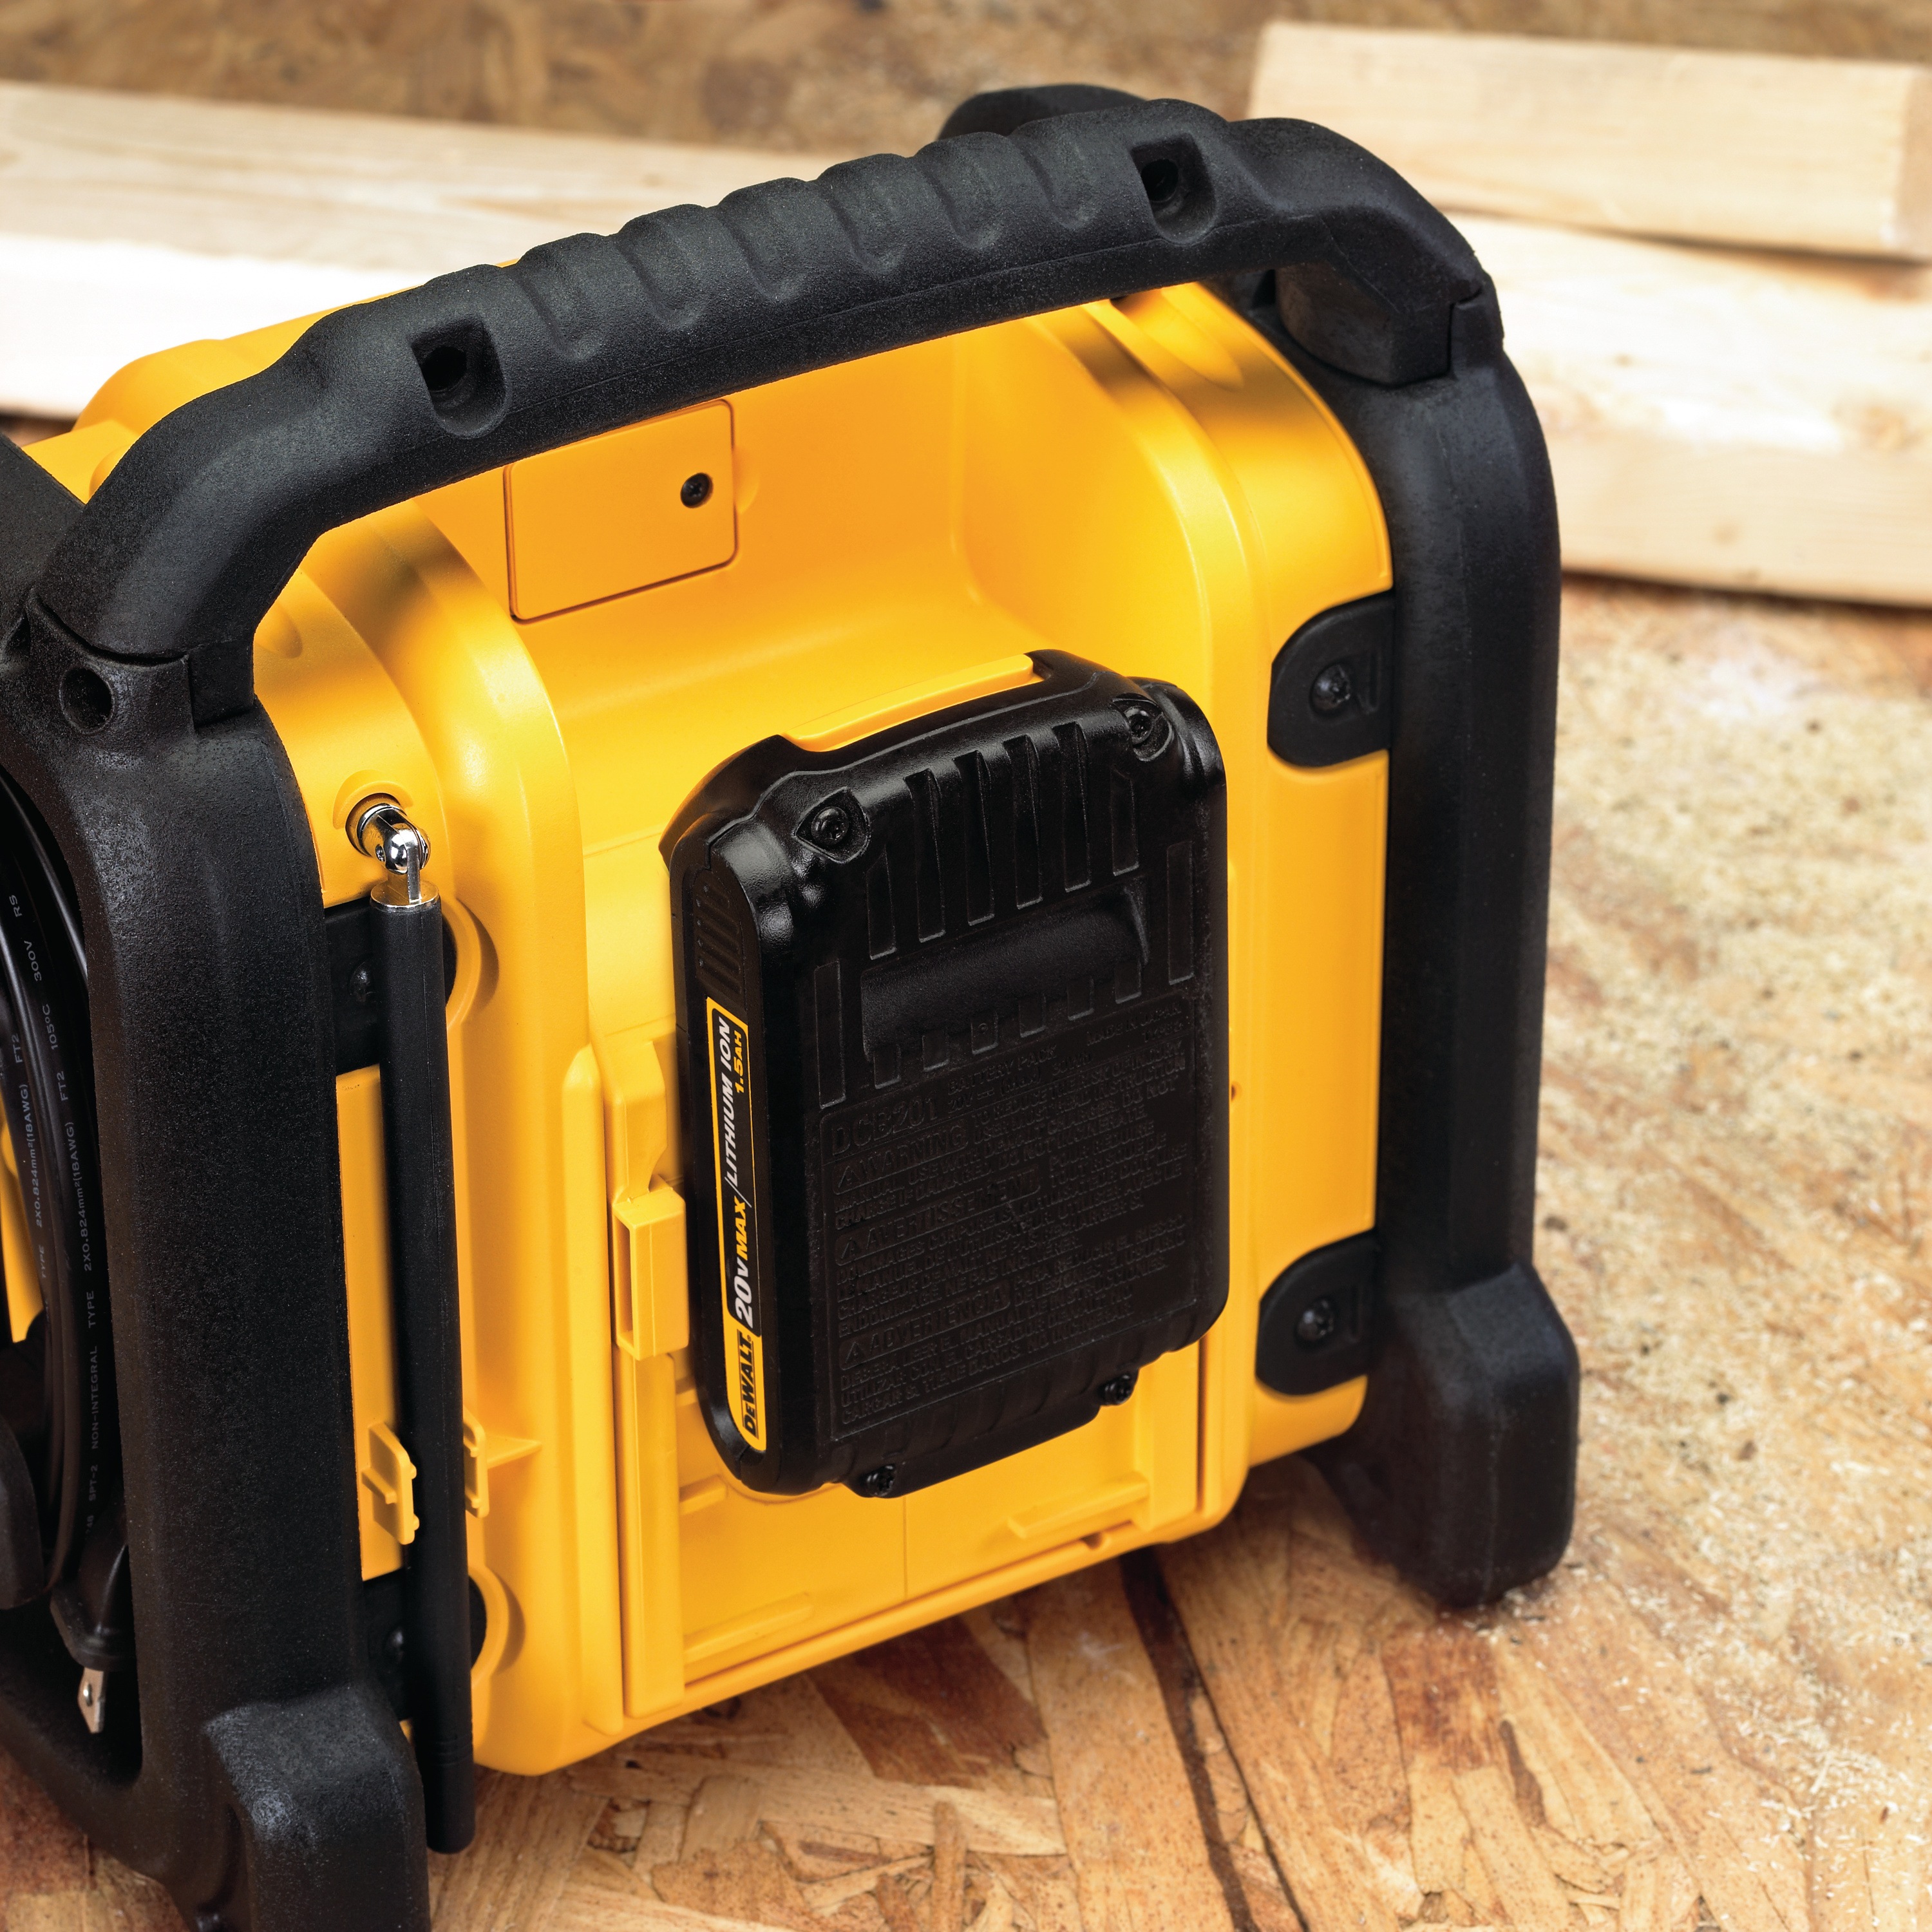 20 volts power battery feature of Compact Worksite Radio.